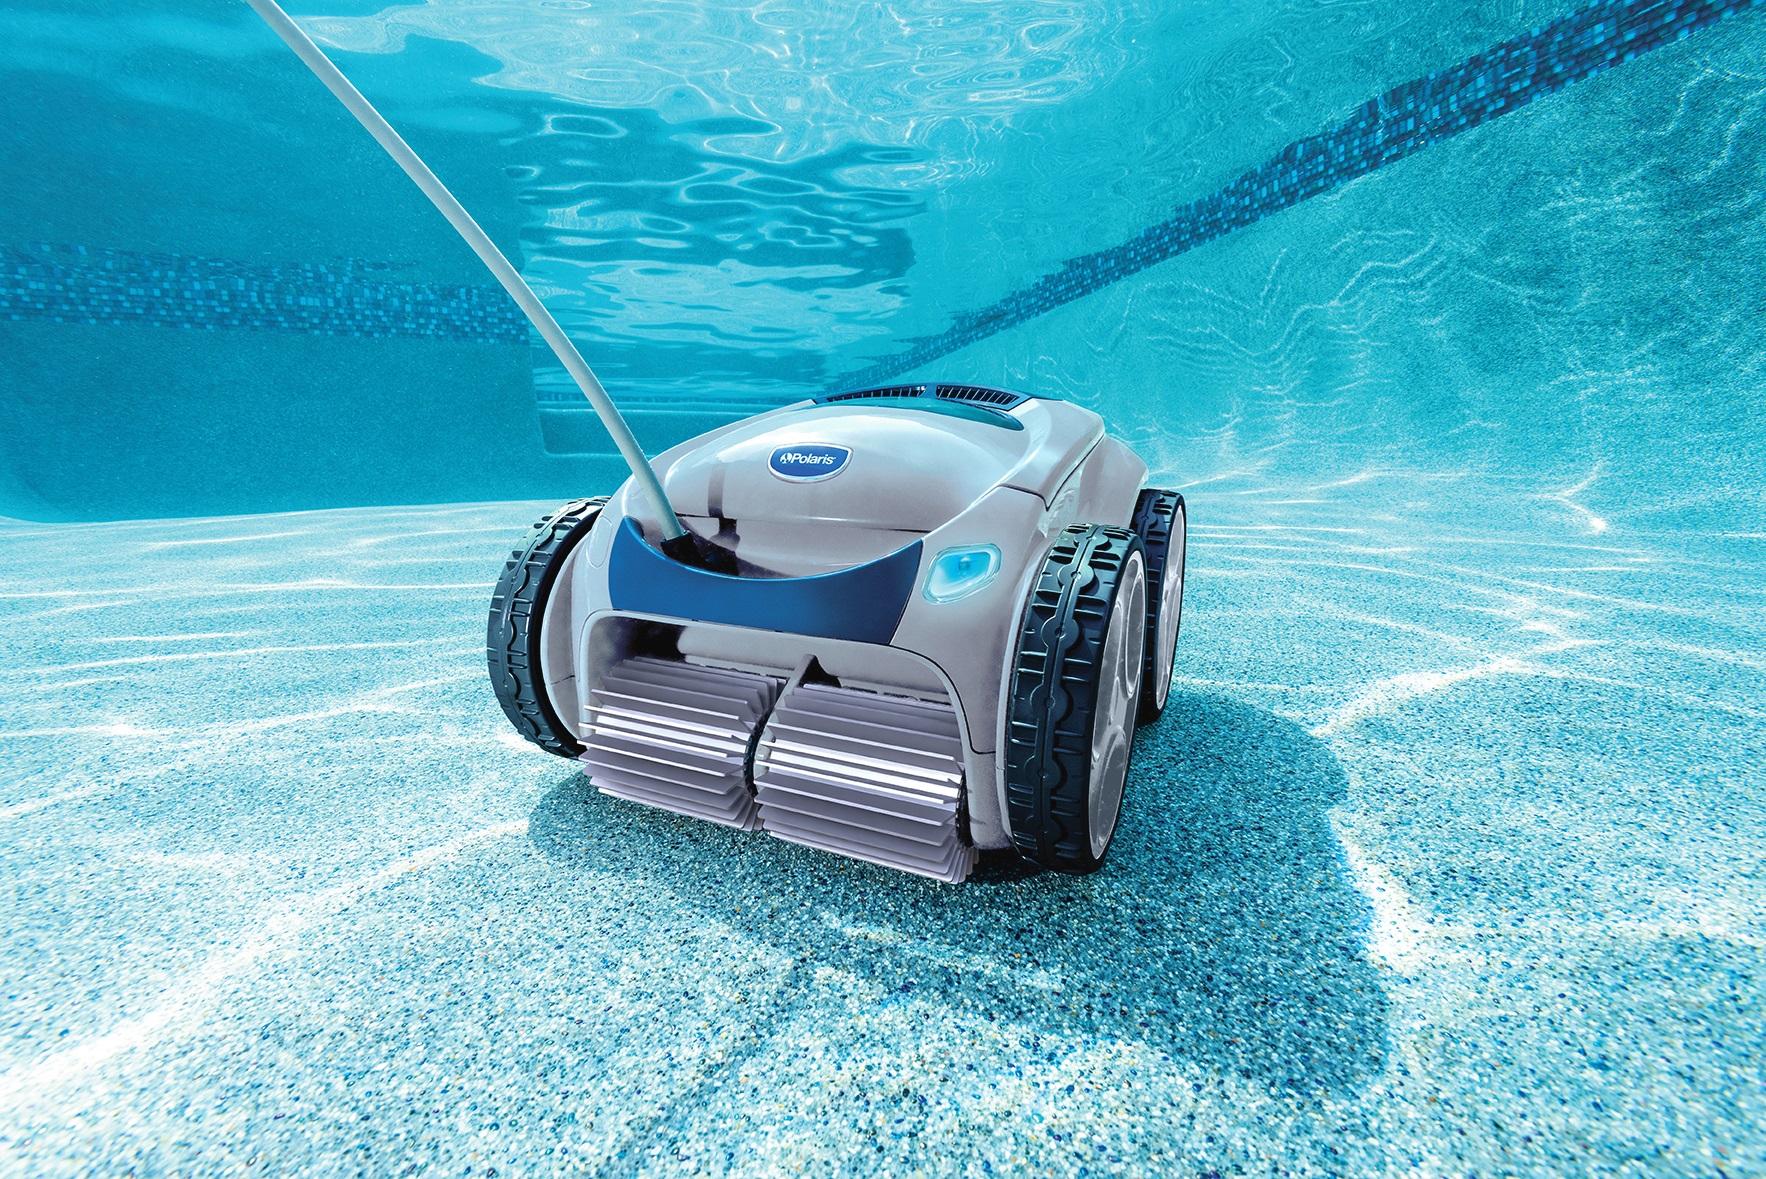 Robotic Pool Vacuums and Pool Cleaner Robots